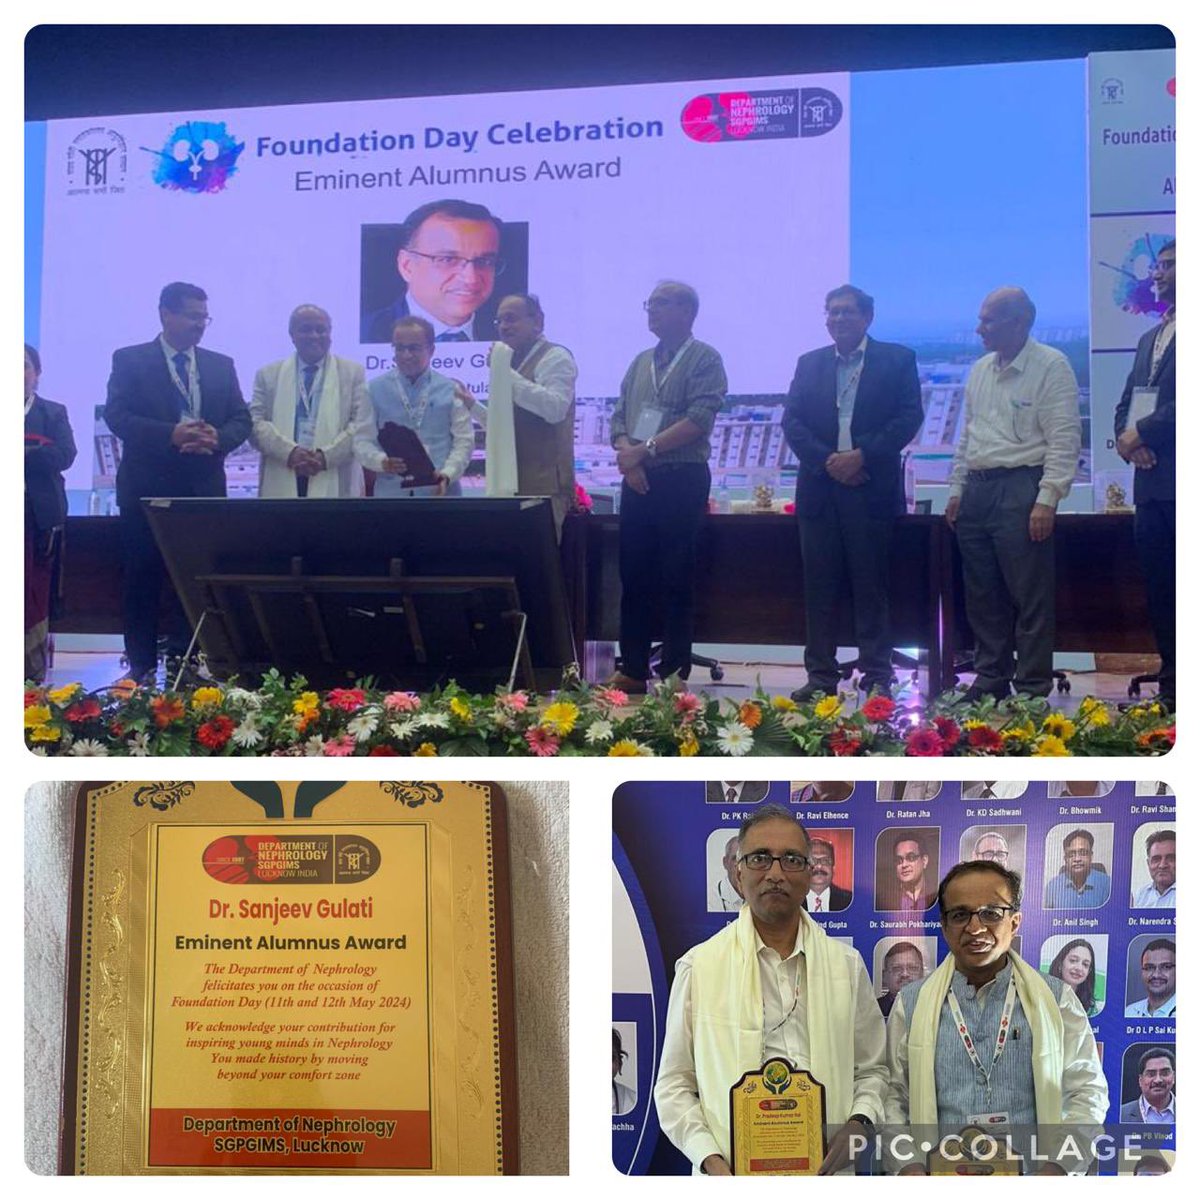 Honoured and privileged to receive the Distinguished Aluminus award at SGPGIMS Foundation Day Celebrations My gratitude to my teachers, colleagues and my students who made this happen 🙏🙏